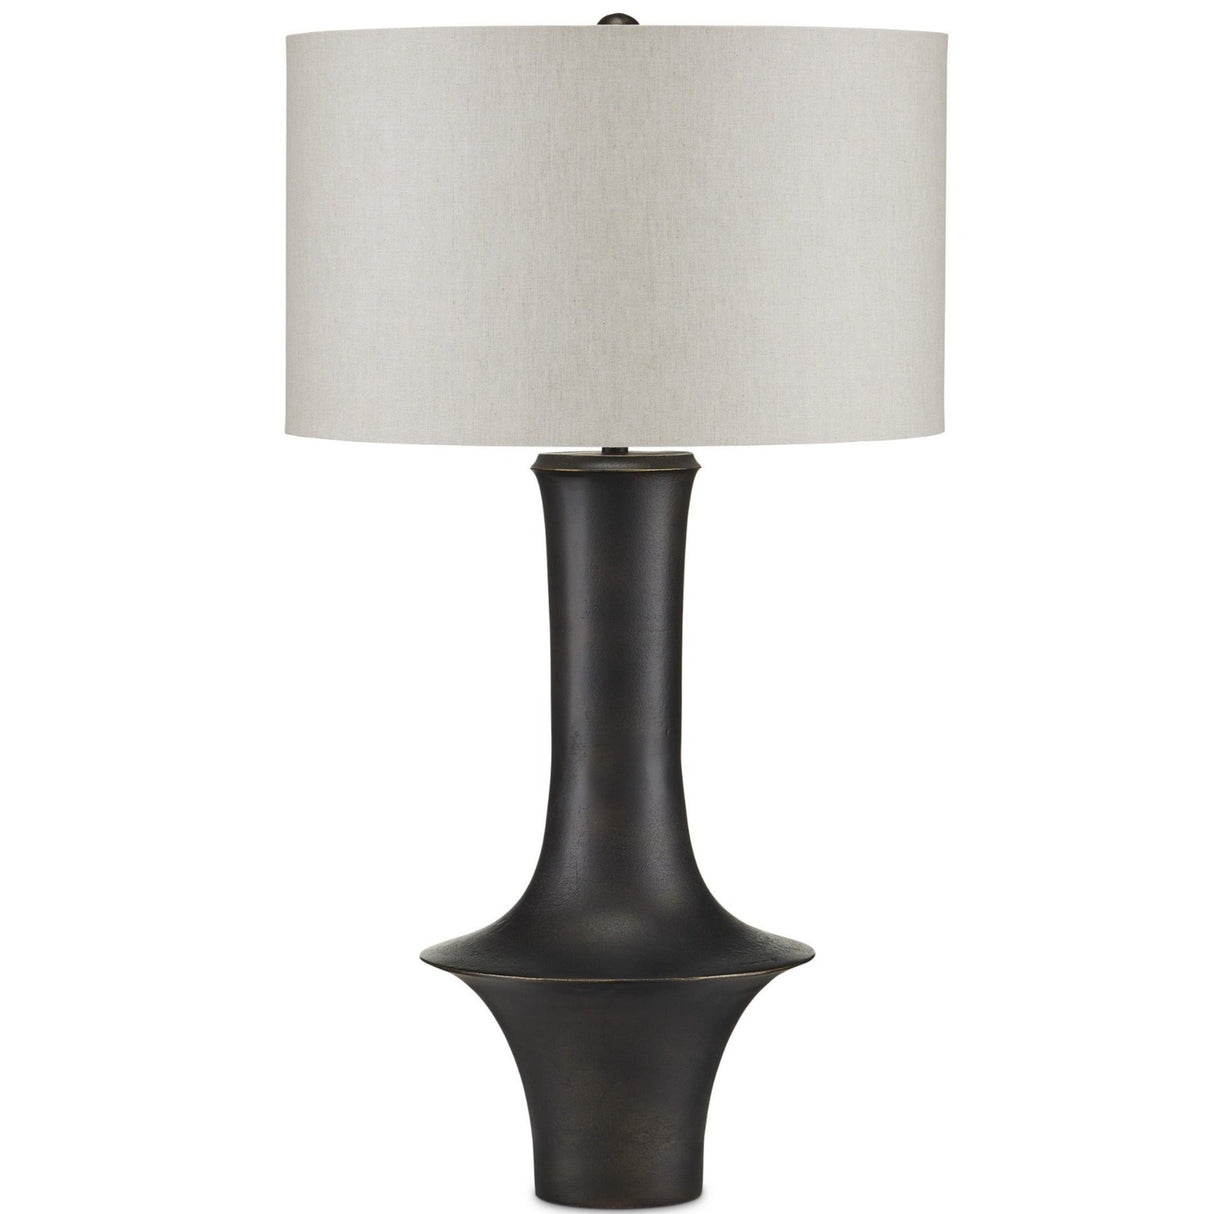 Currey & Company Silvestri Table Lamp Table Lamps currey-co-6000-0888 633306053007